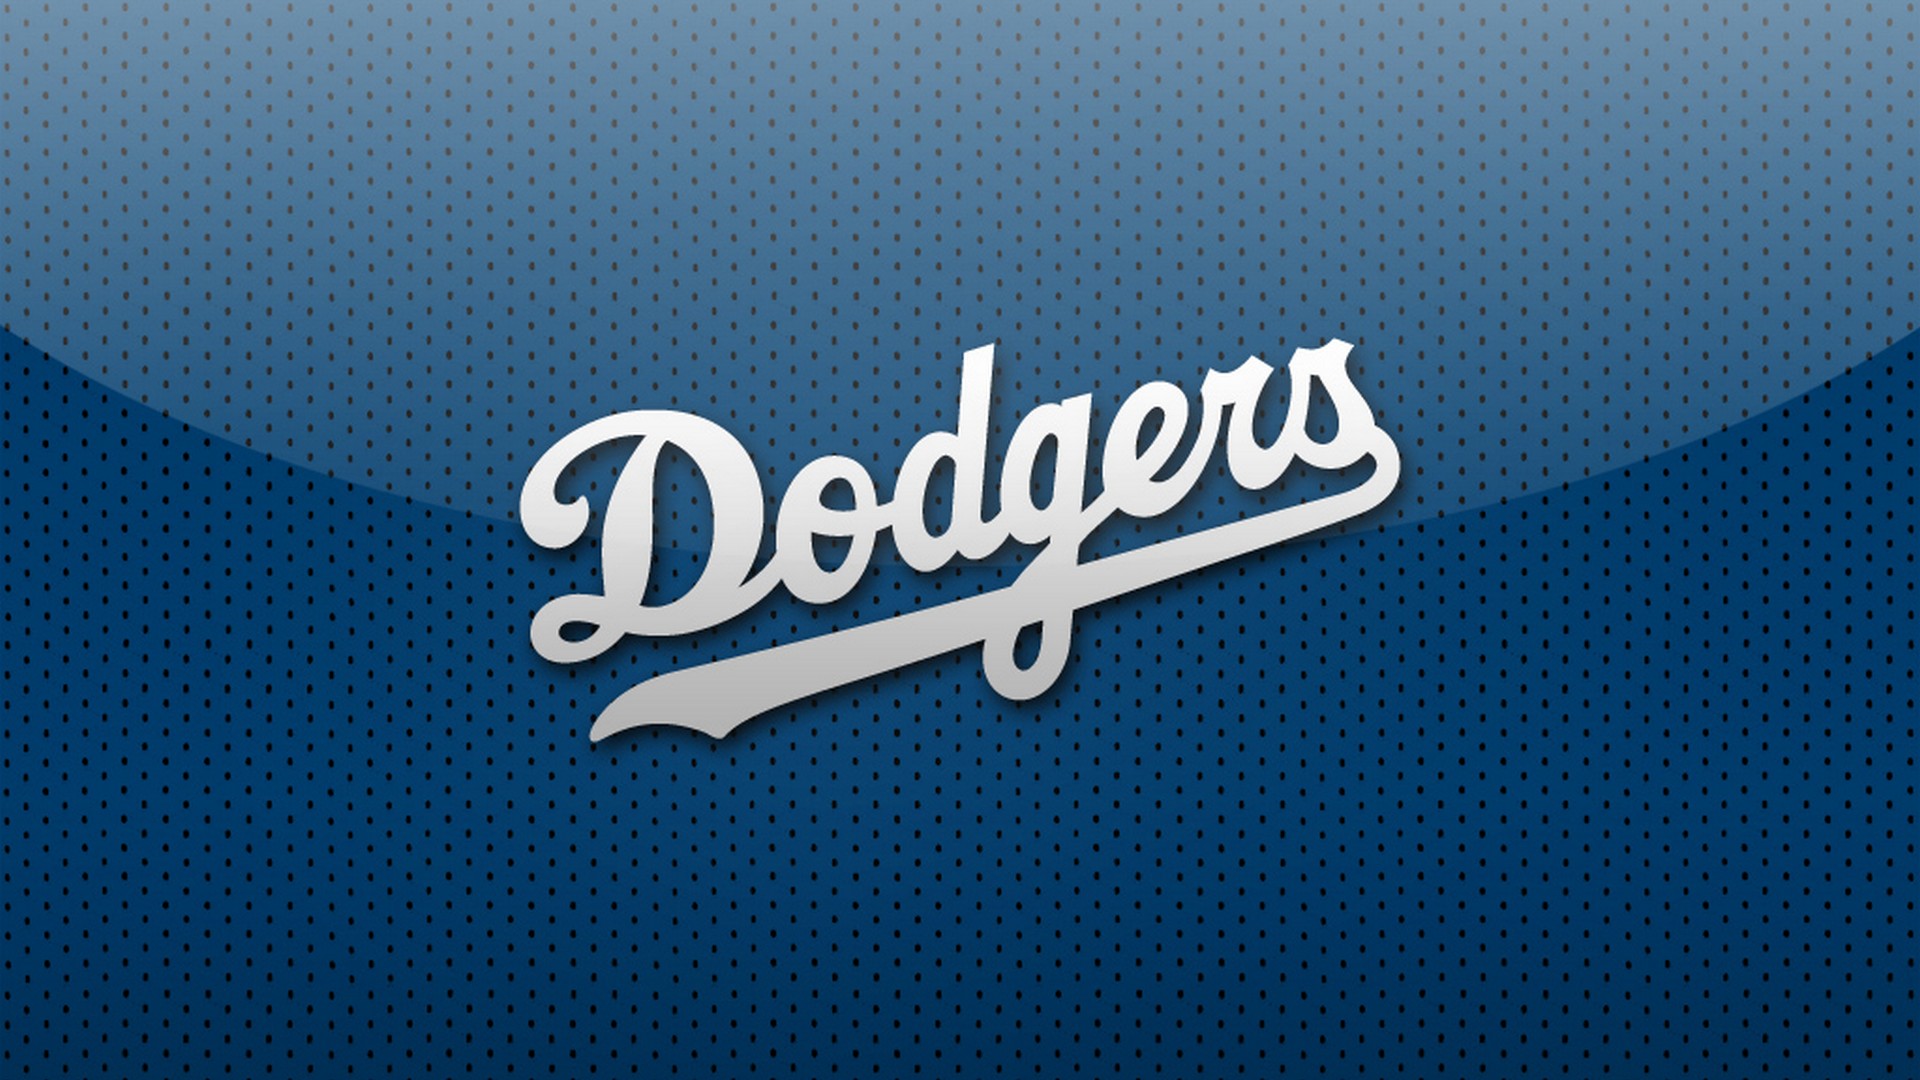 Los Angeles Dodgers MLB Desktop Wallpaper With high-resolution 1920X1080 pixel. You can use this wallpaper for Mac Desktop Wallpaper, Laptop Screensavers, Android Wallpapers, Tablet or iPhone Home Screen and another mobile phone device